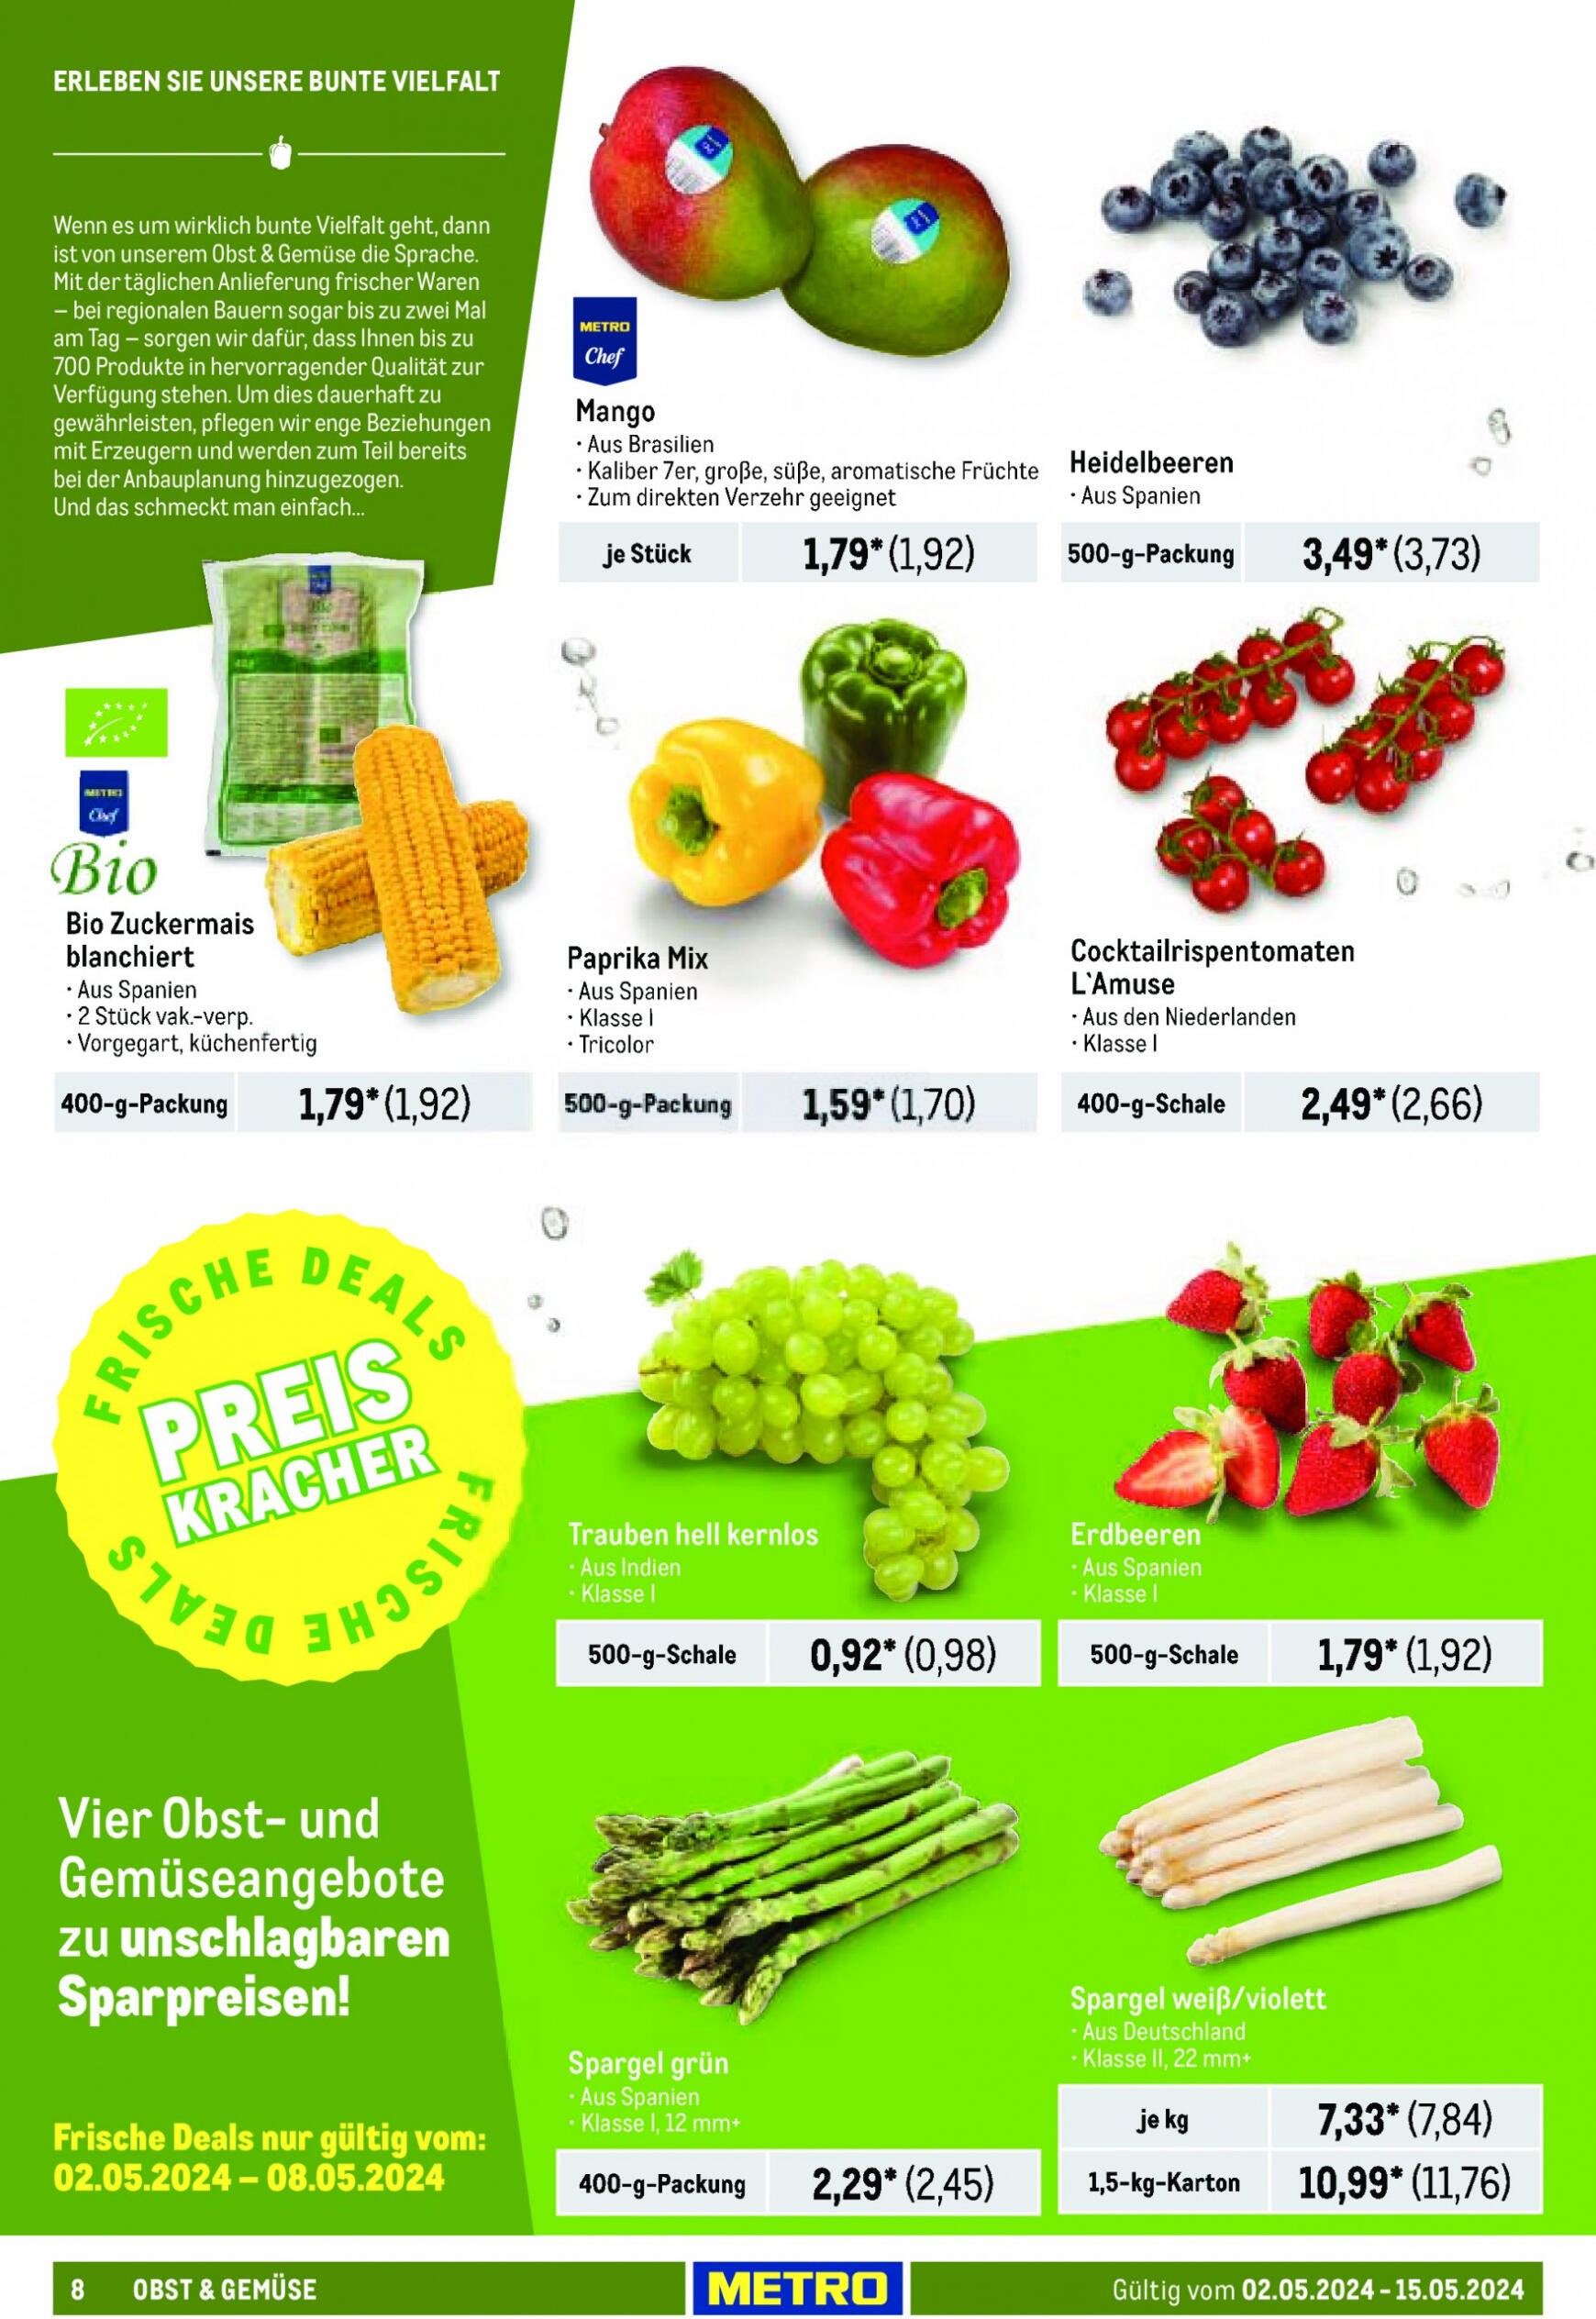 metro - Flyer Metro - Food-NonFood aktuell 02.05. - 15.05. - page: 8